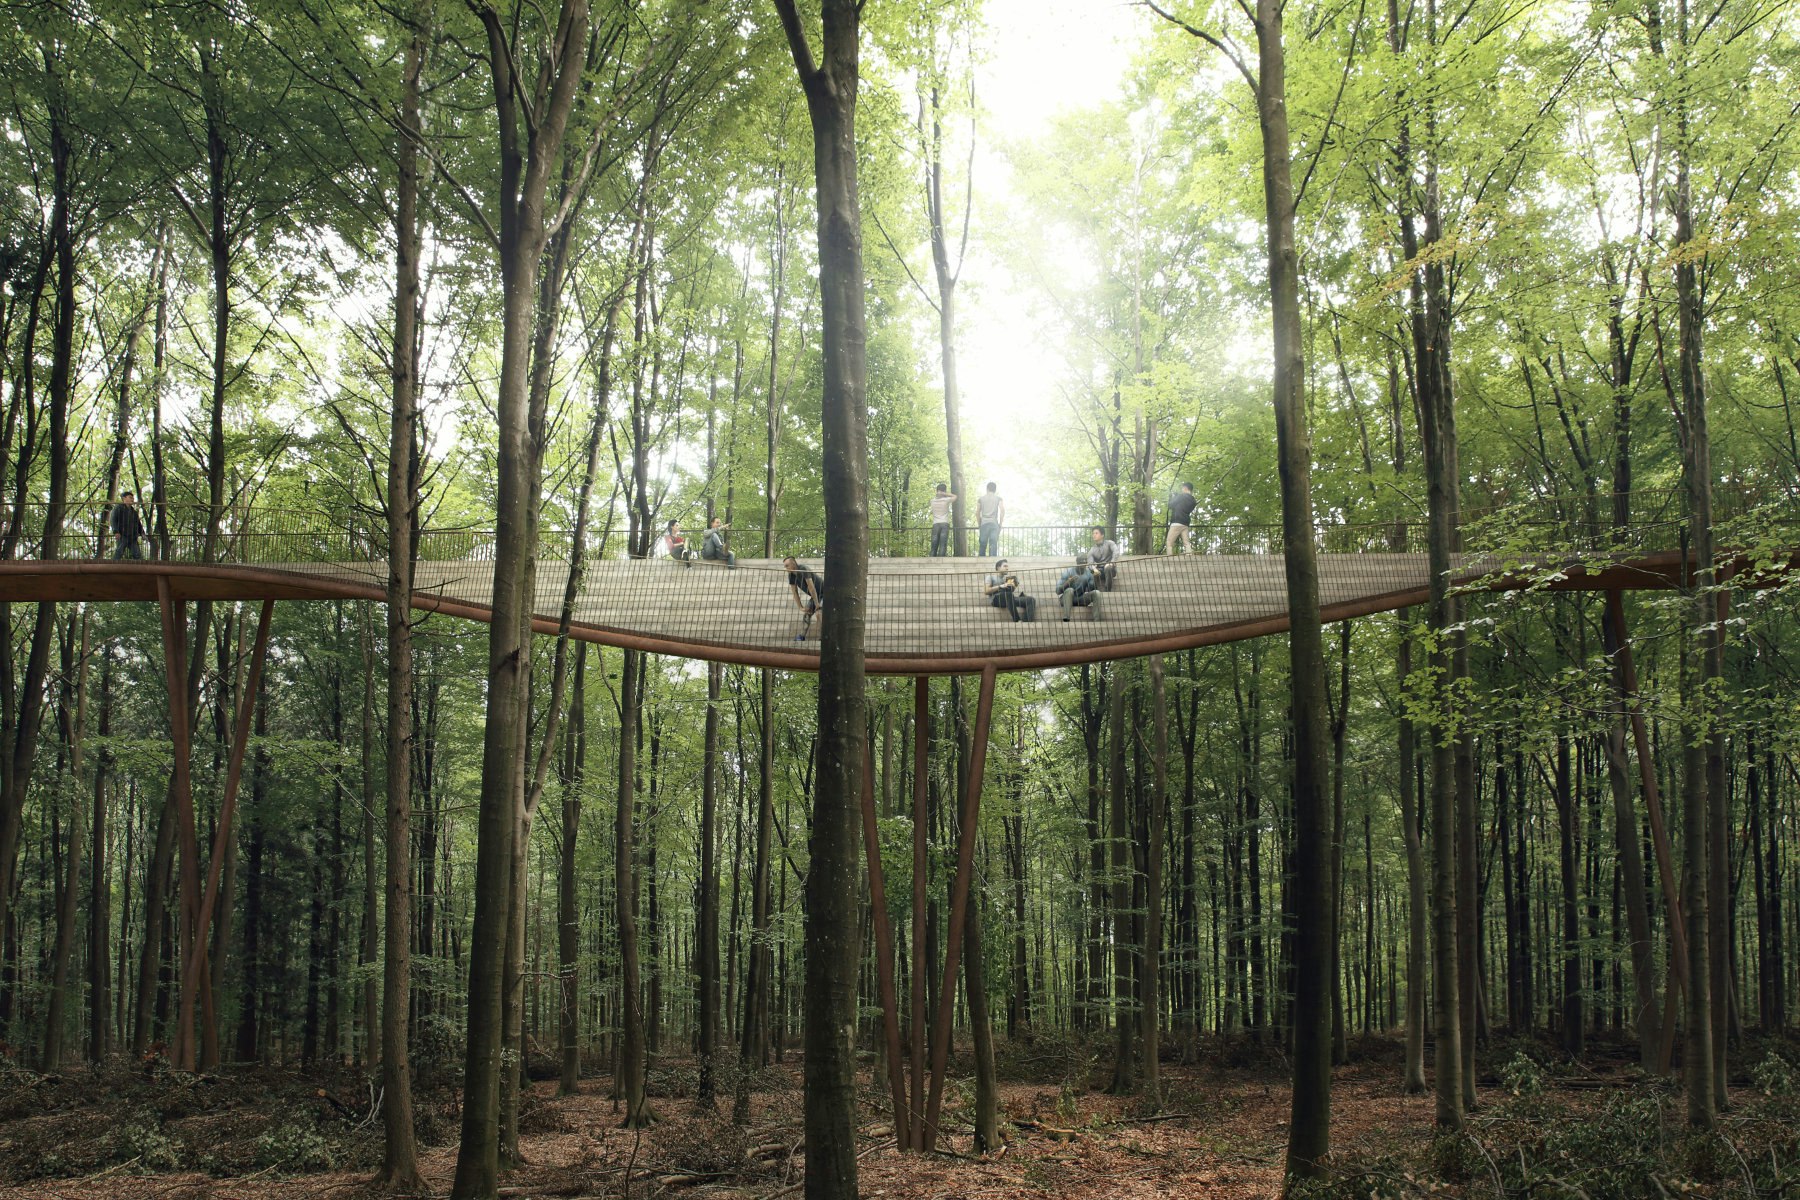 There will be plenty of rest stops along the forest canopy walk. Image by EFFEKT